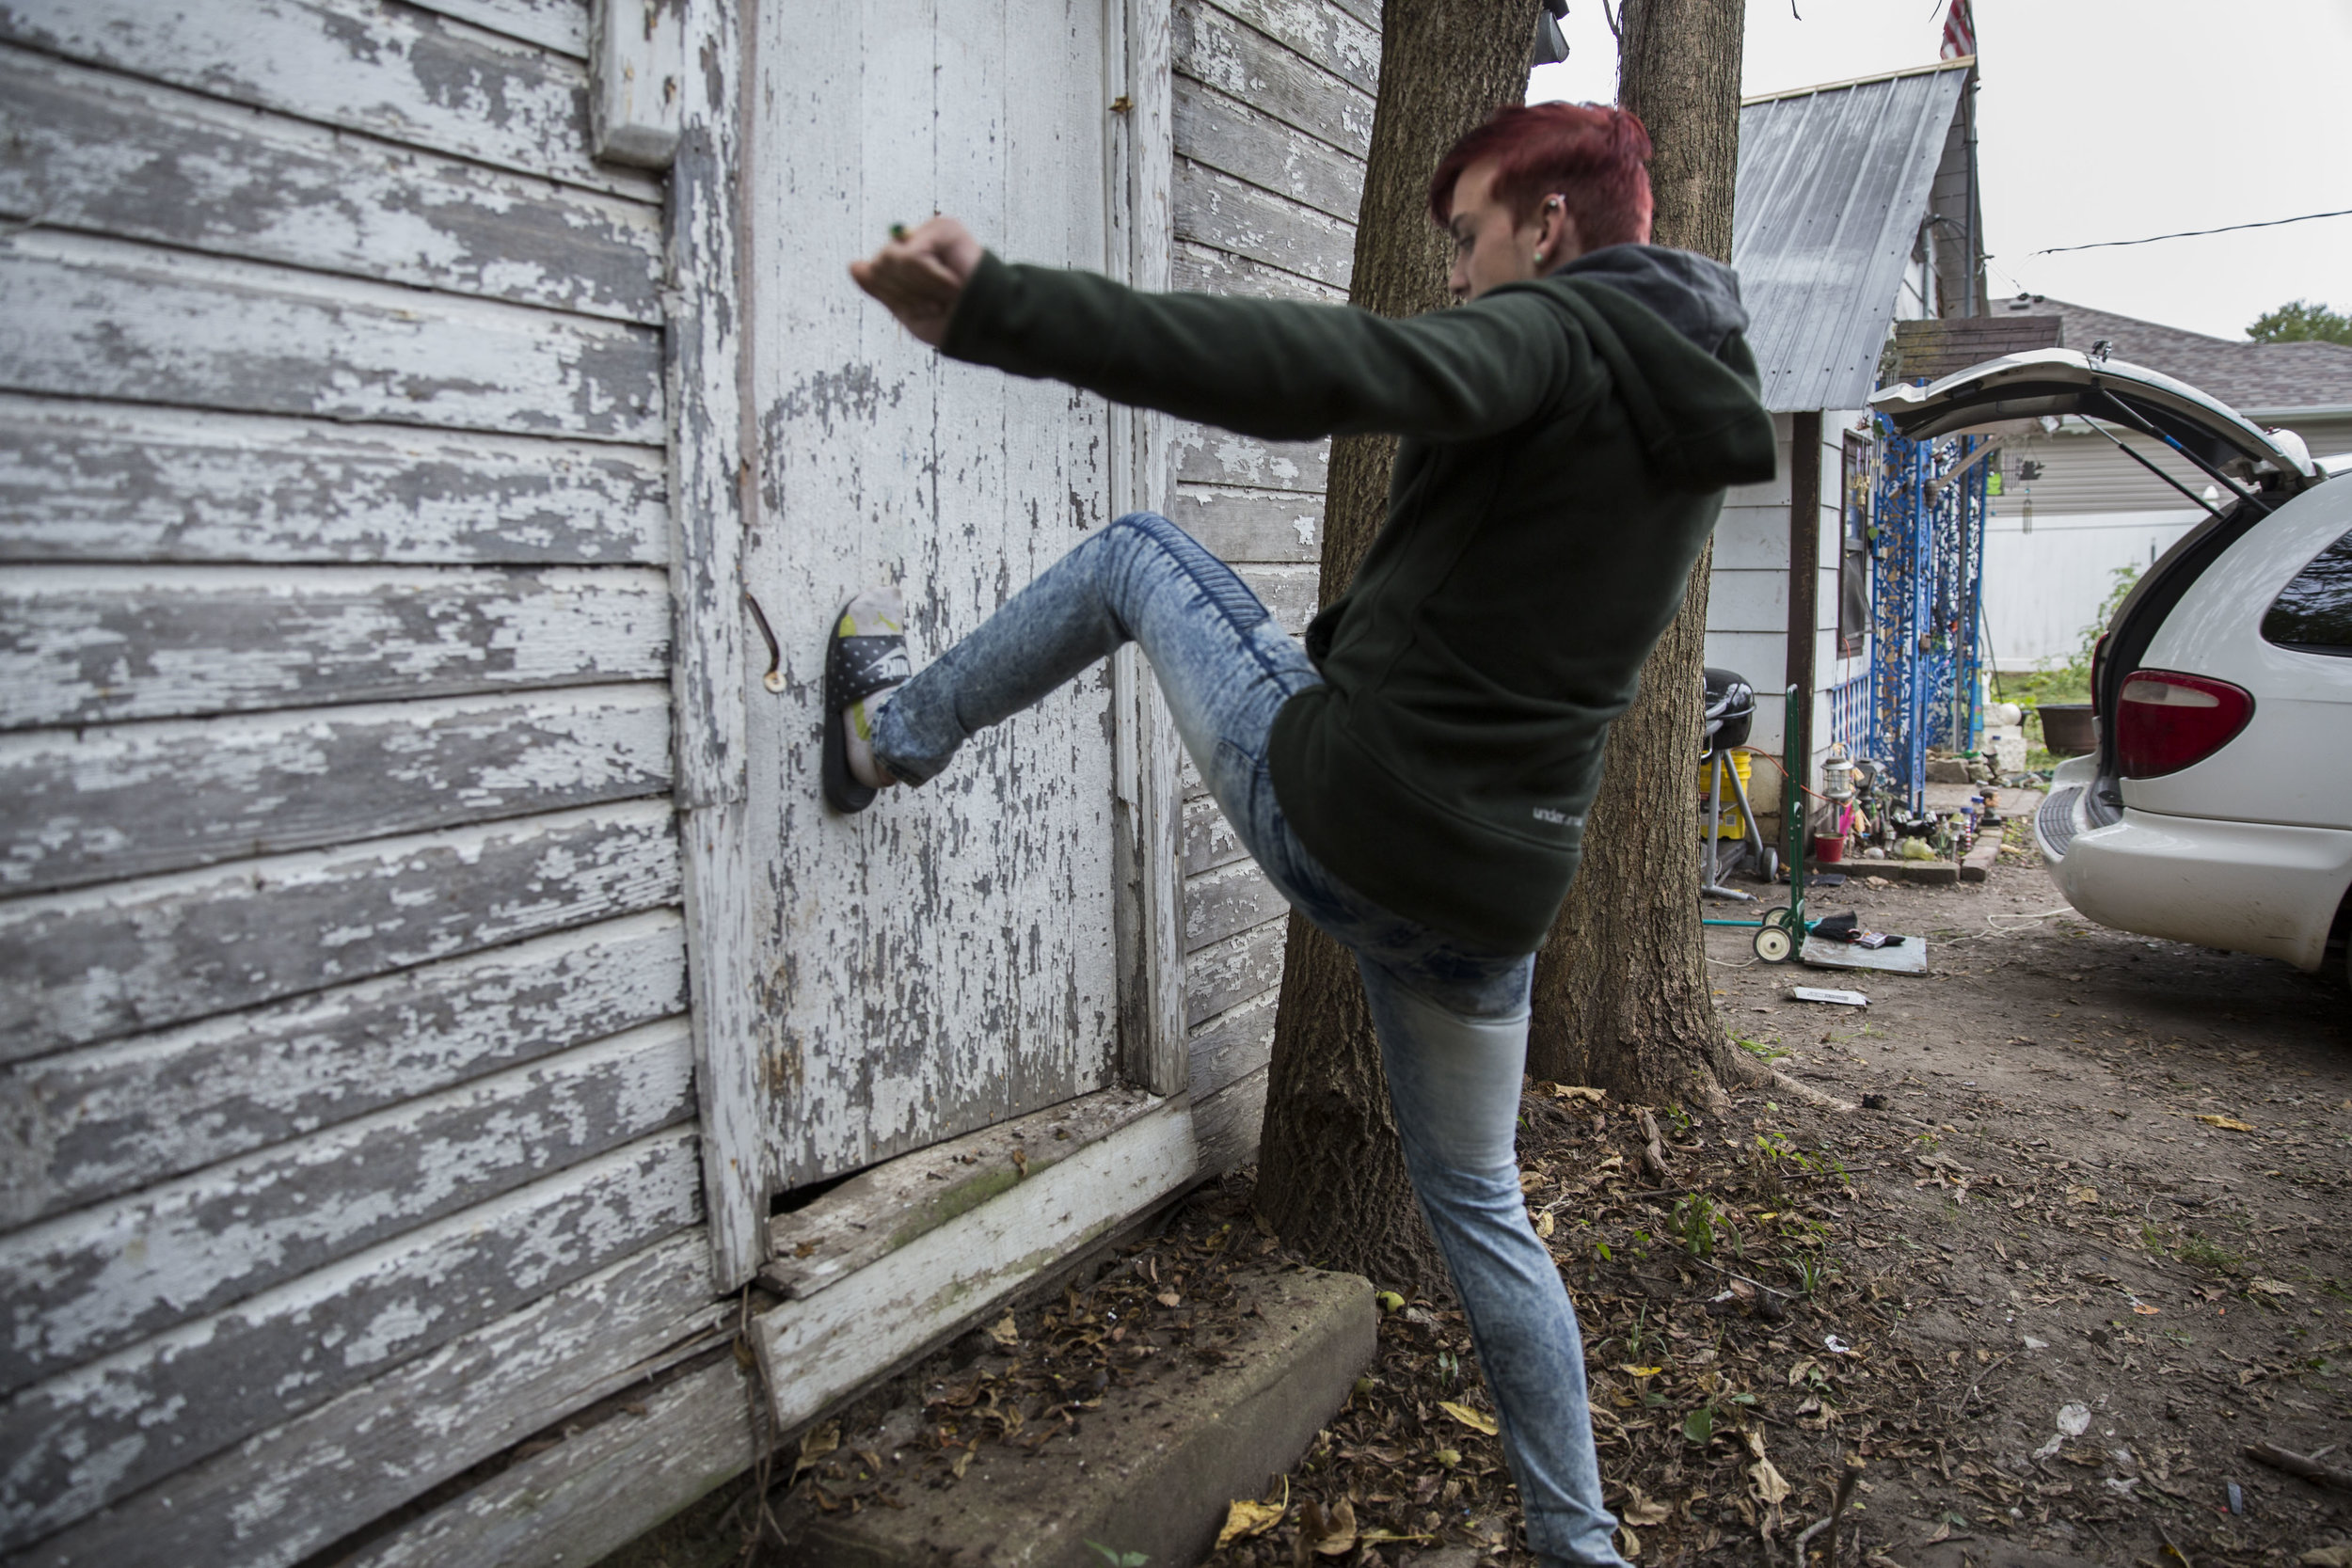   Billy kicks the door of an abandoned house next to Chris’ home. These houses are often used by addicts as shelter to get high in.  